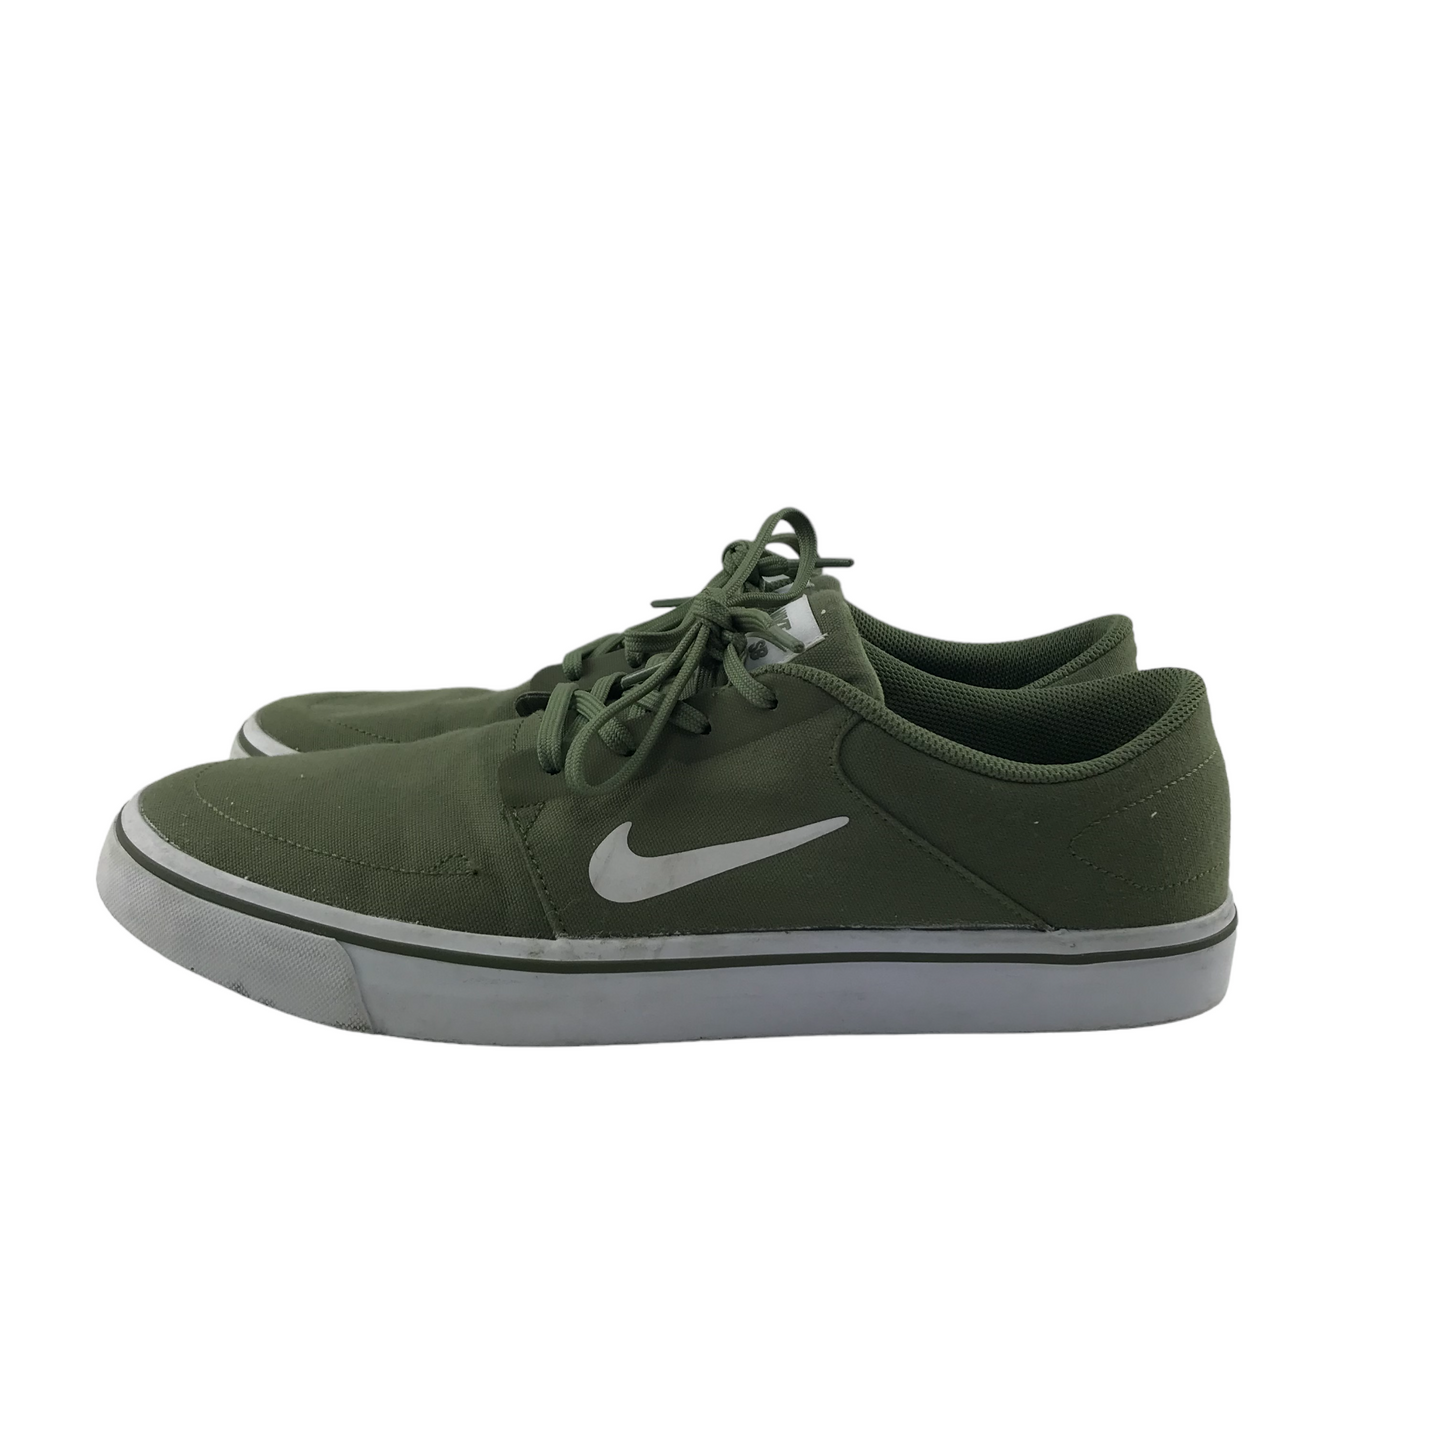 Nike SB Trainers Shoe Size 8.5 Khaki Green Flat Soles and Laces